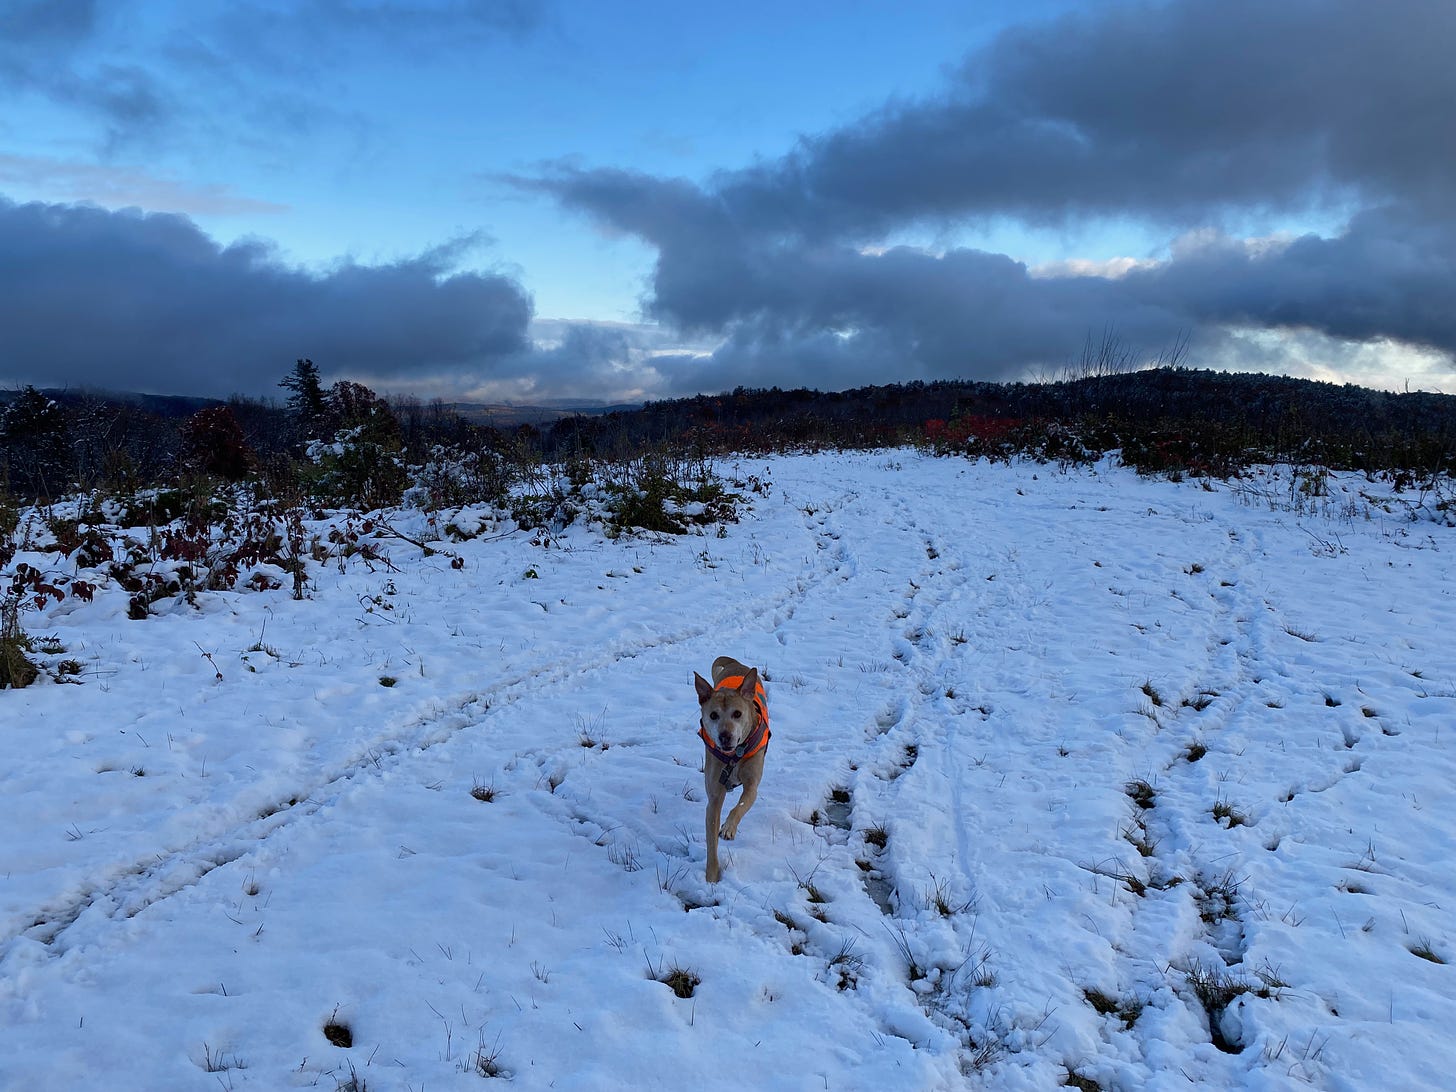 Nessa running, mid-stride, ears pointing up, legs extended, on a snowy ridgetop field in front of a bank of blue and purple clouds in the late afternoon sky.